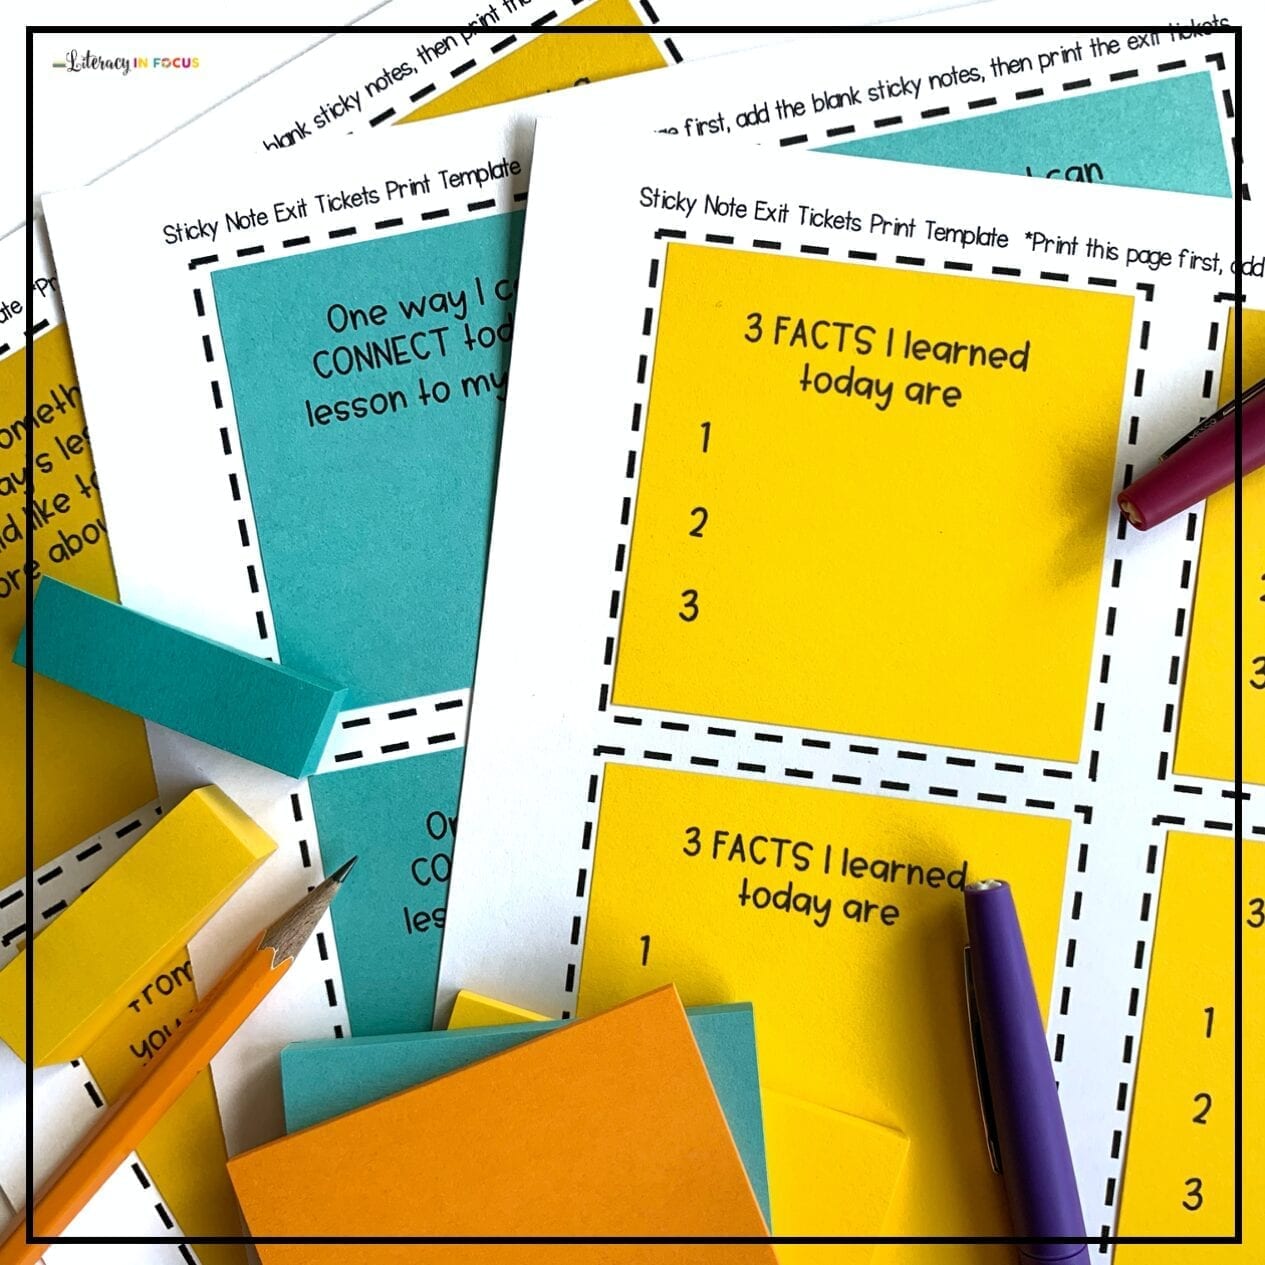 Sticky Note Exit Tickets